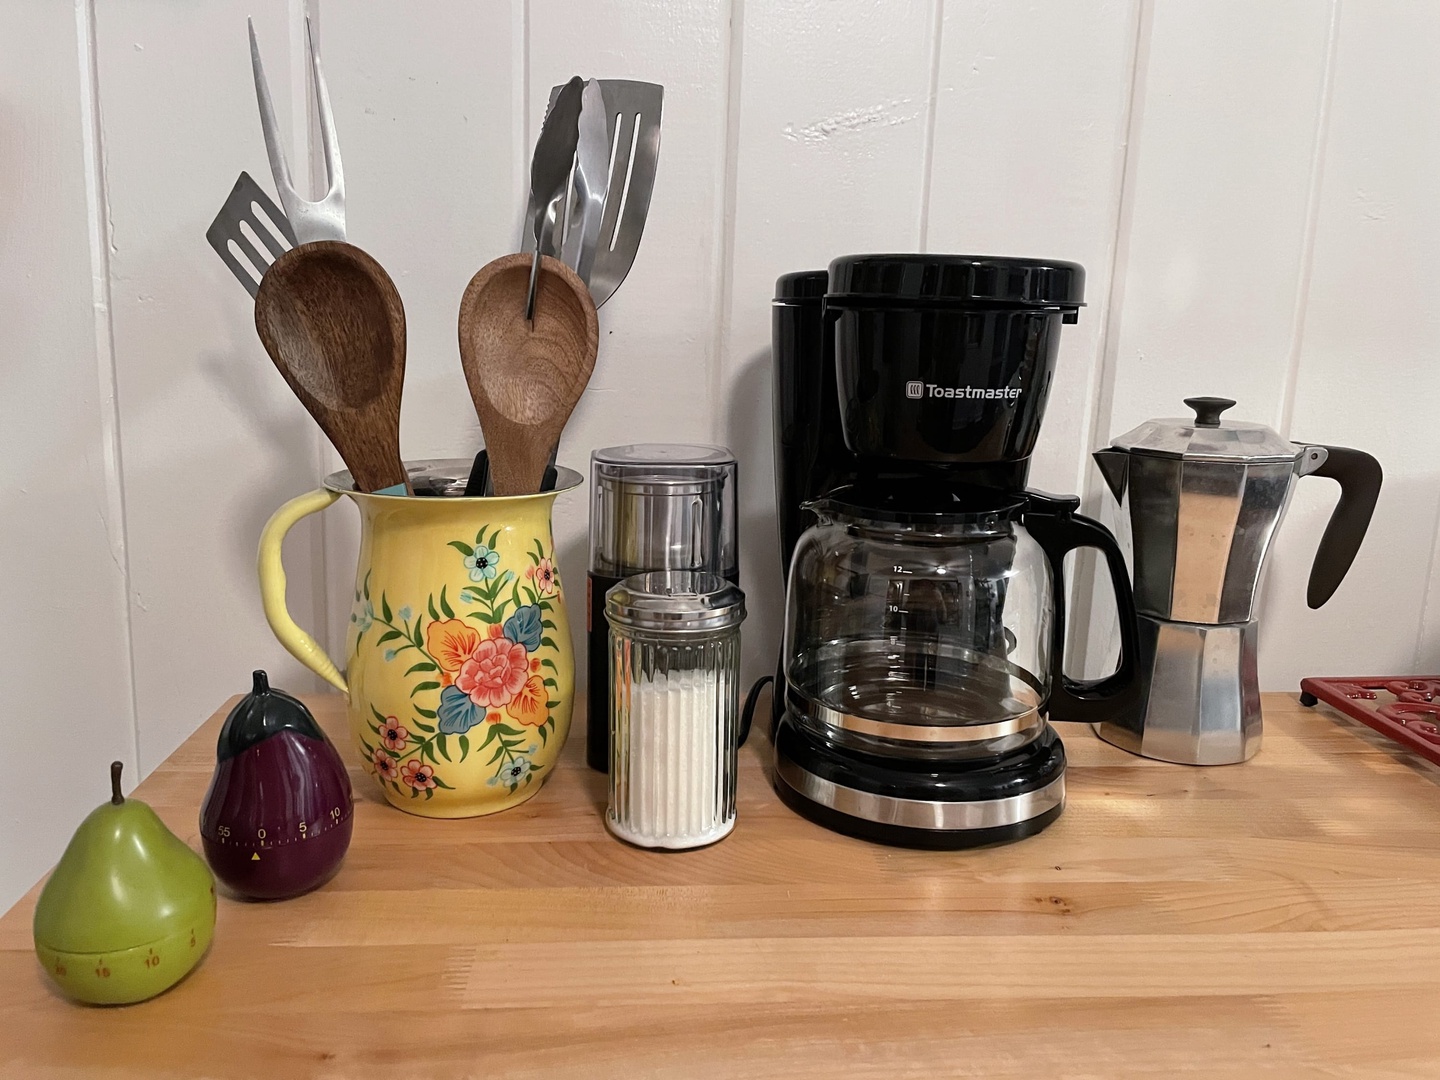 Brightwood Vacation Rentals, Springbrook Cabin - The coffee bar is stocked with locally roasted coffee and has a traditional pot and a stovetop "cowboy" coffee pot